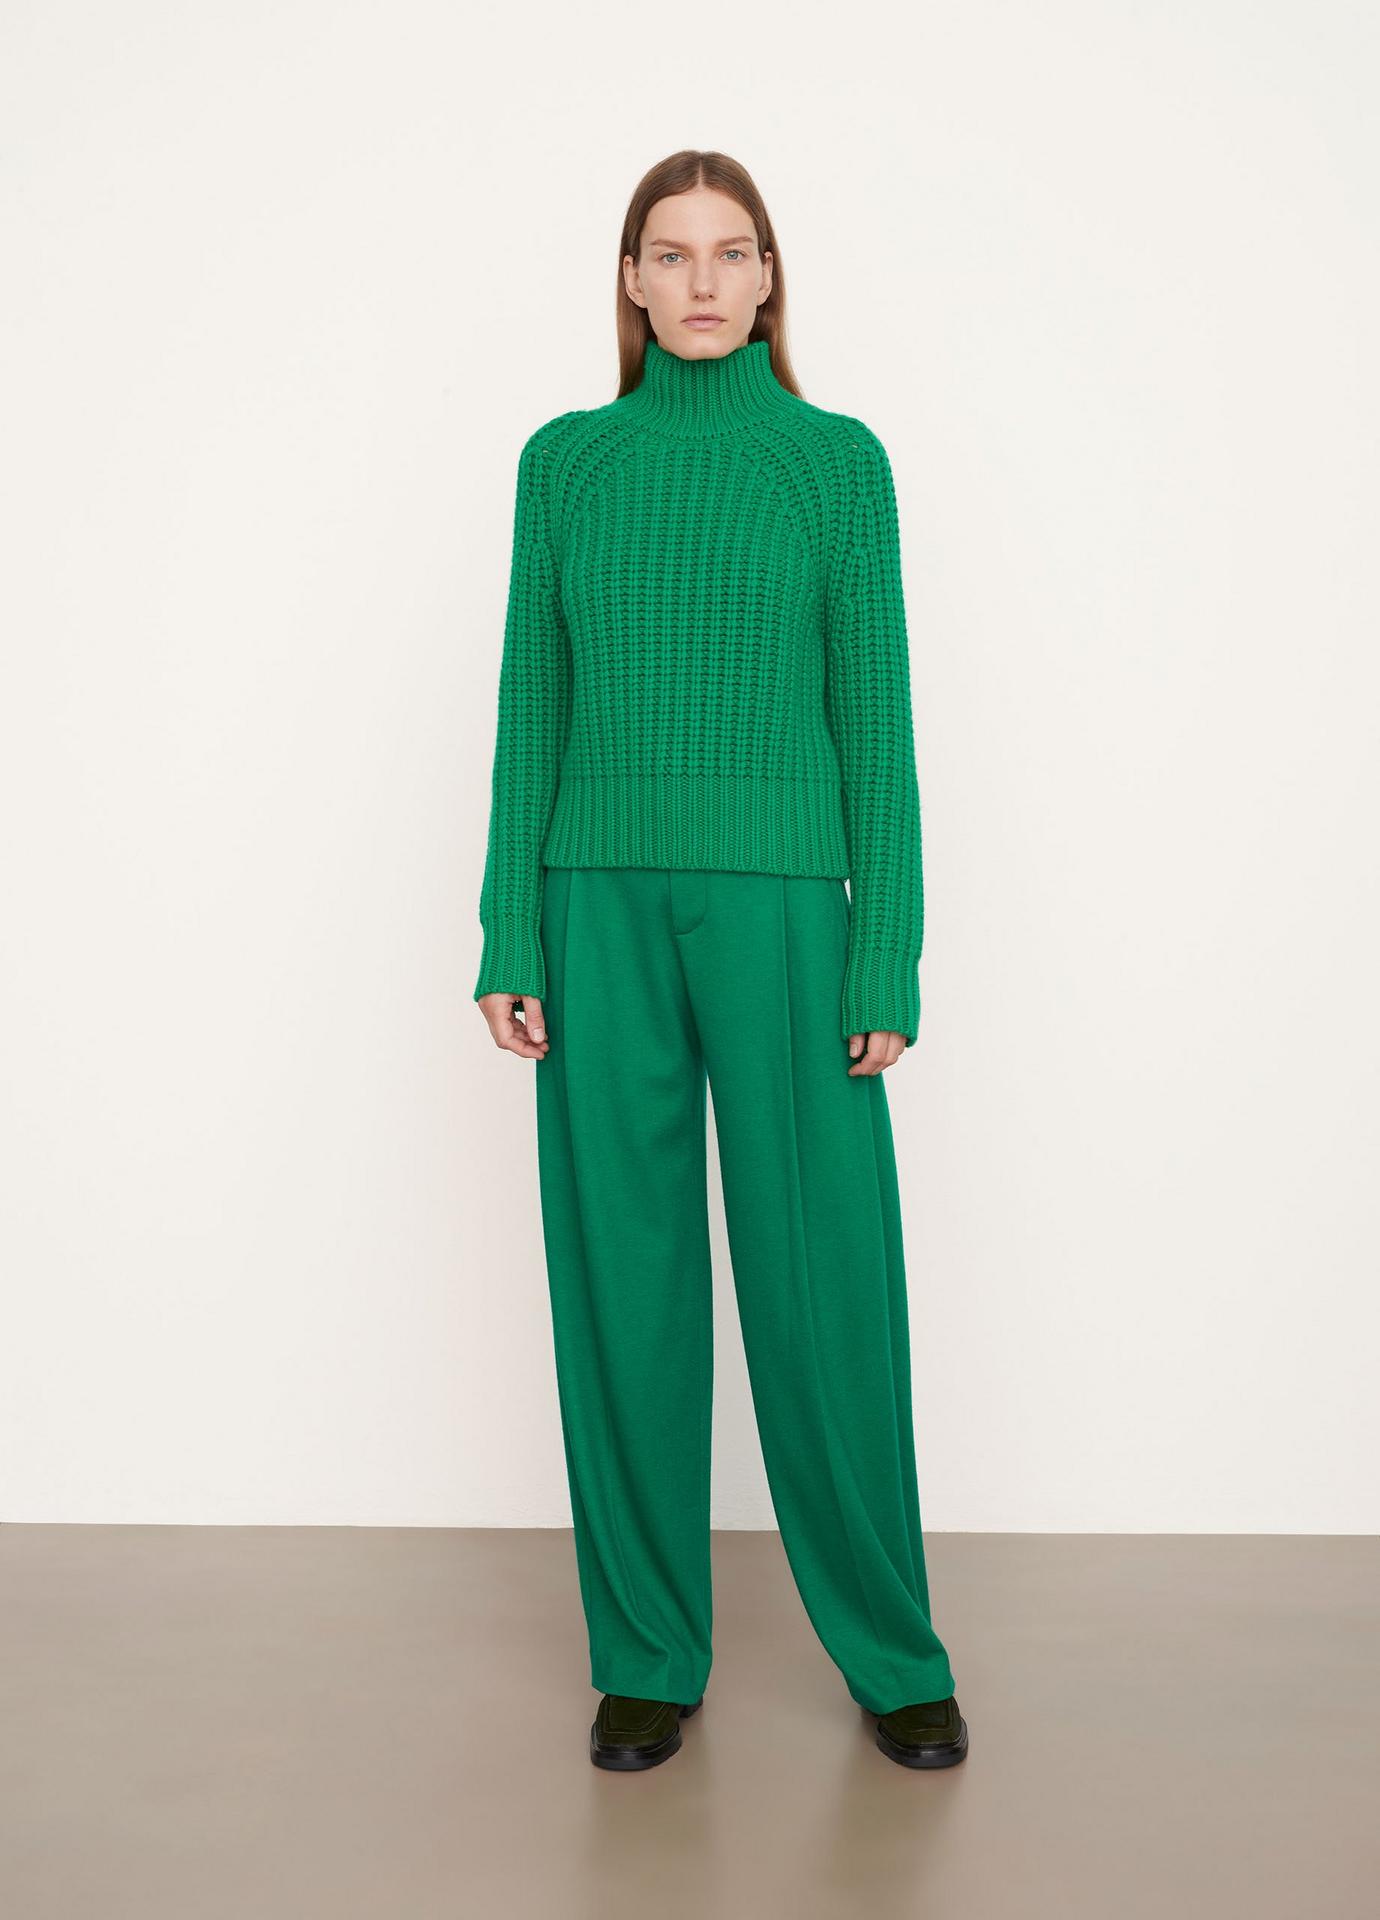 Vince Wool and Cashmere Textured Turtleneck Sweater